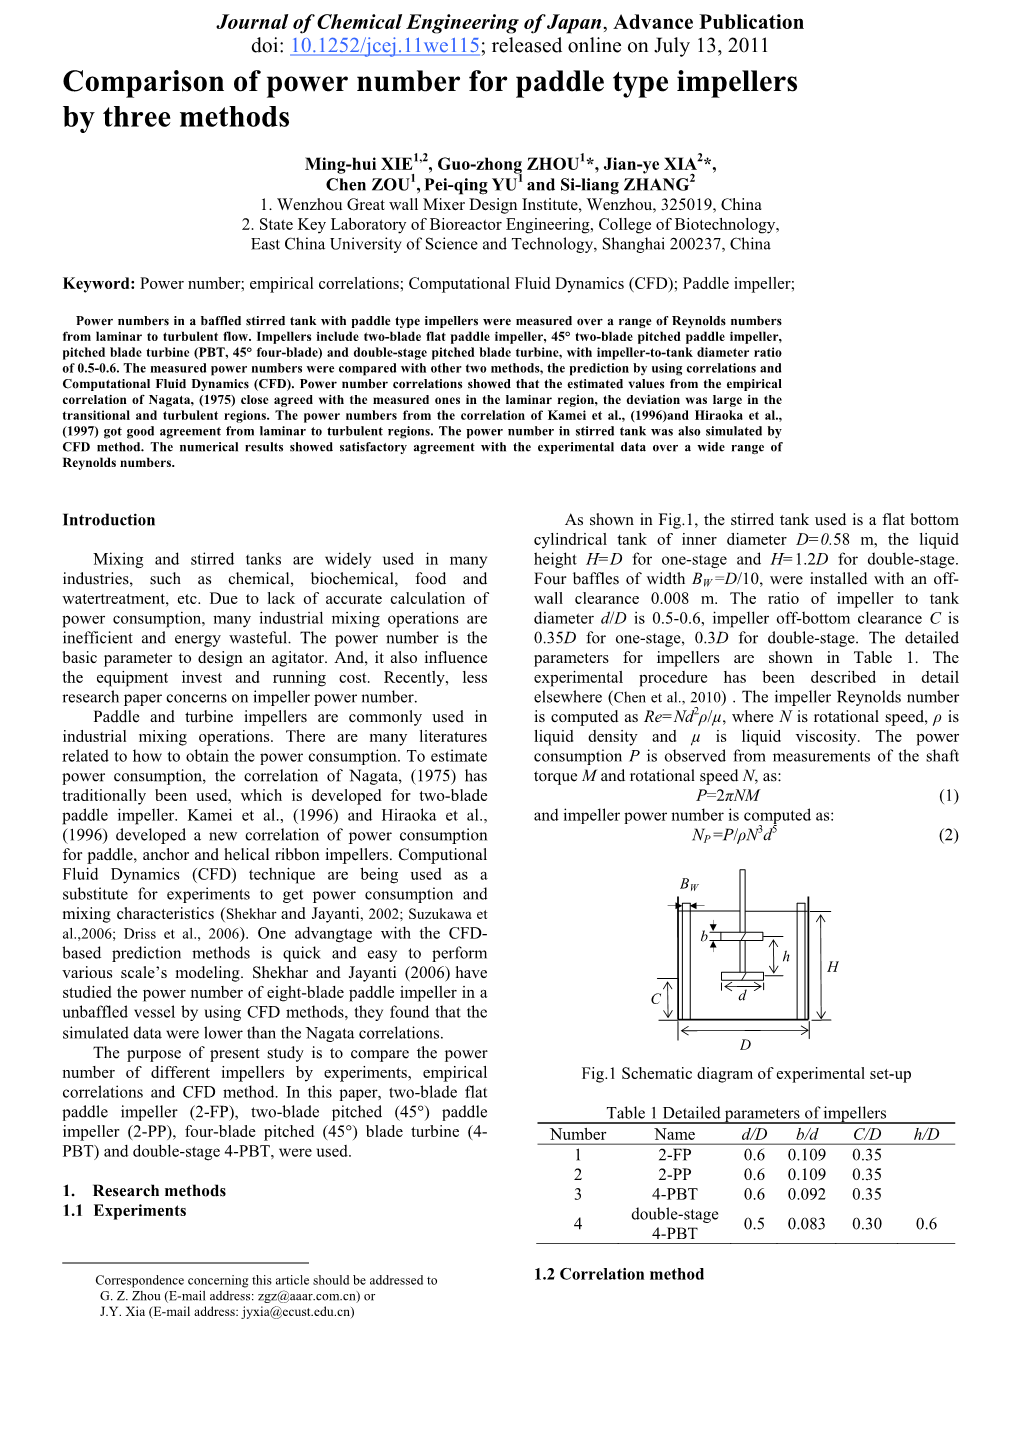 Comparison of Power Number for Paddle Type Impellers by Three Methods